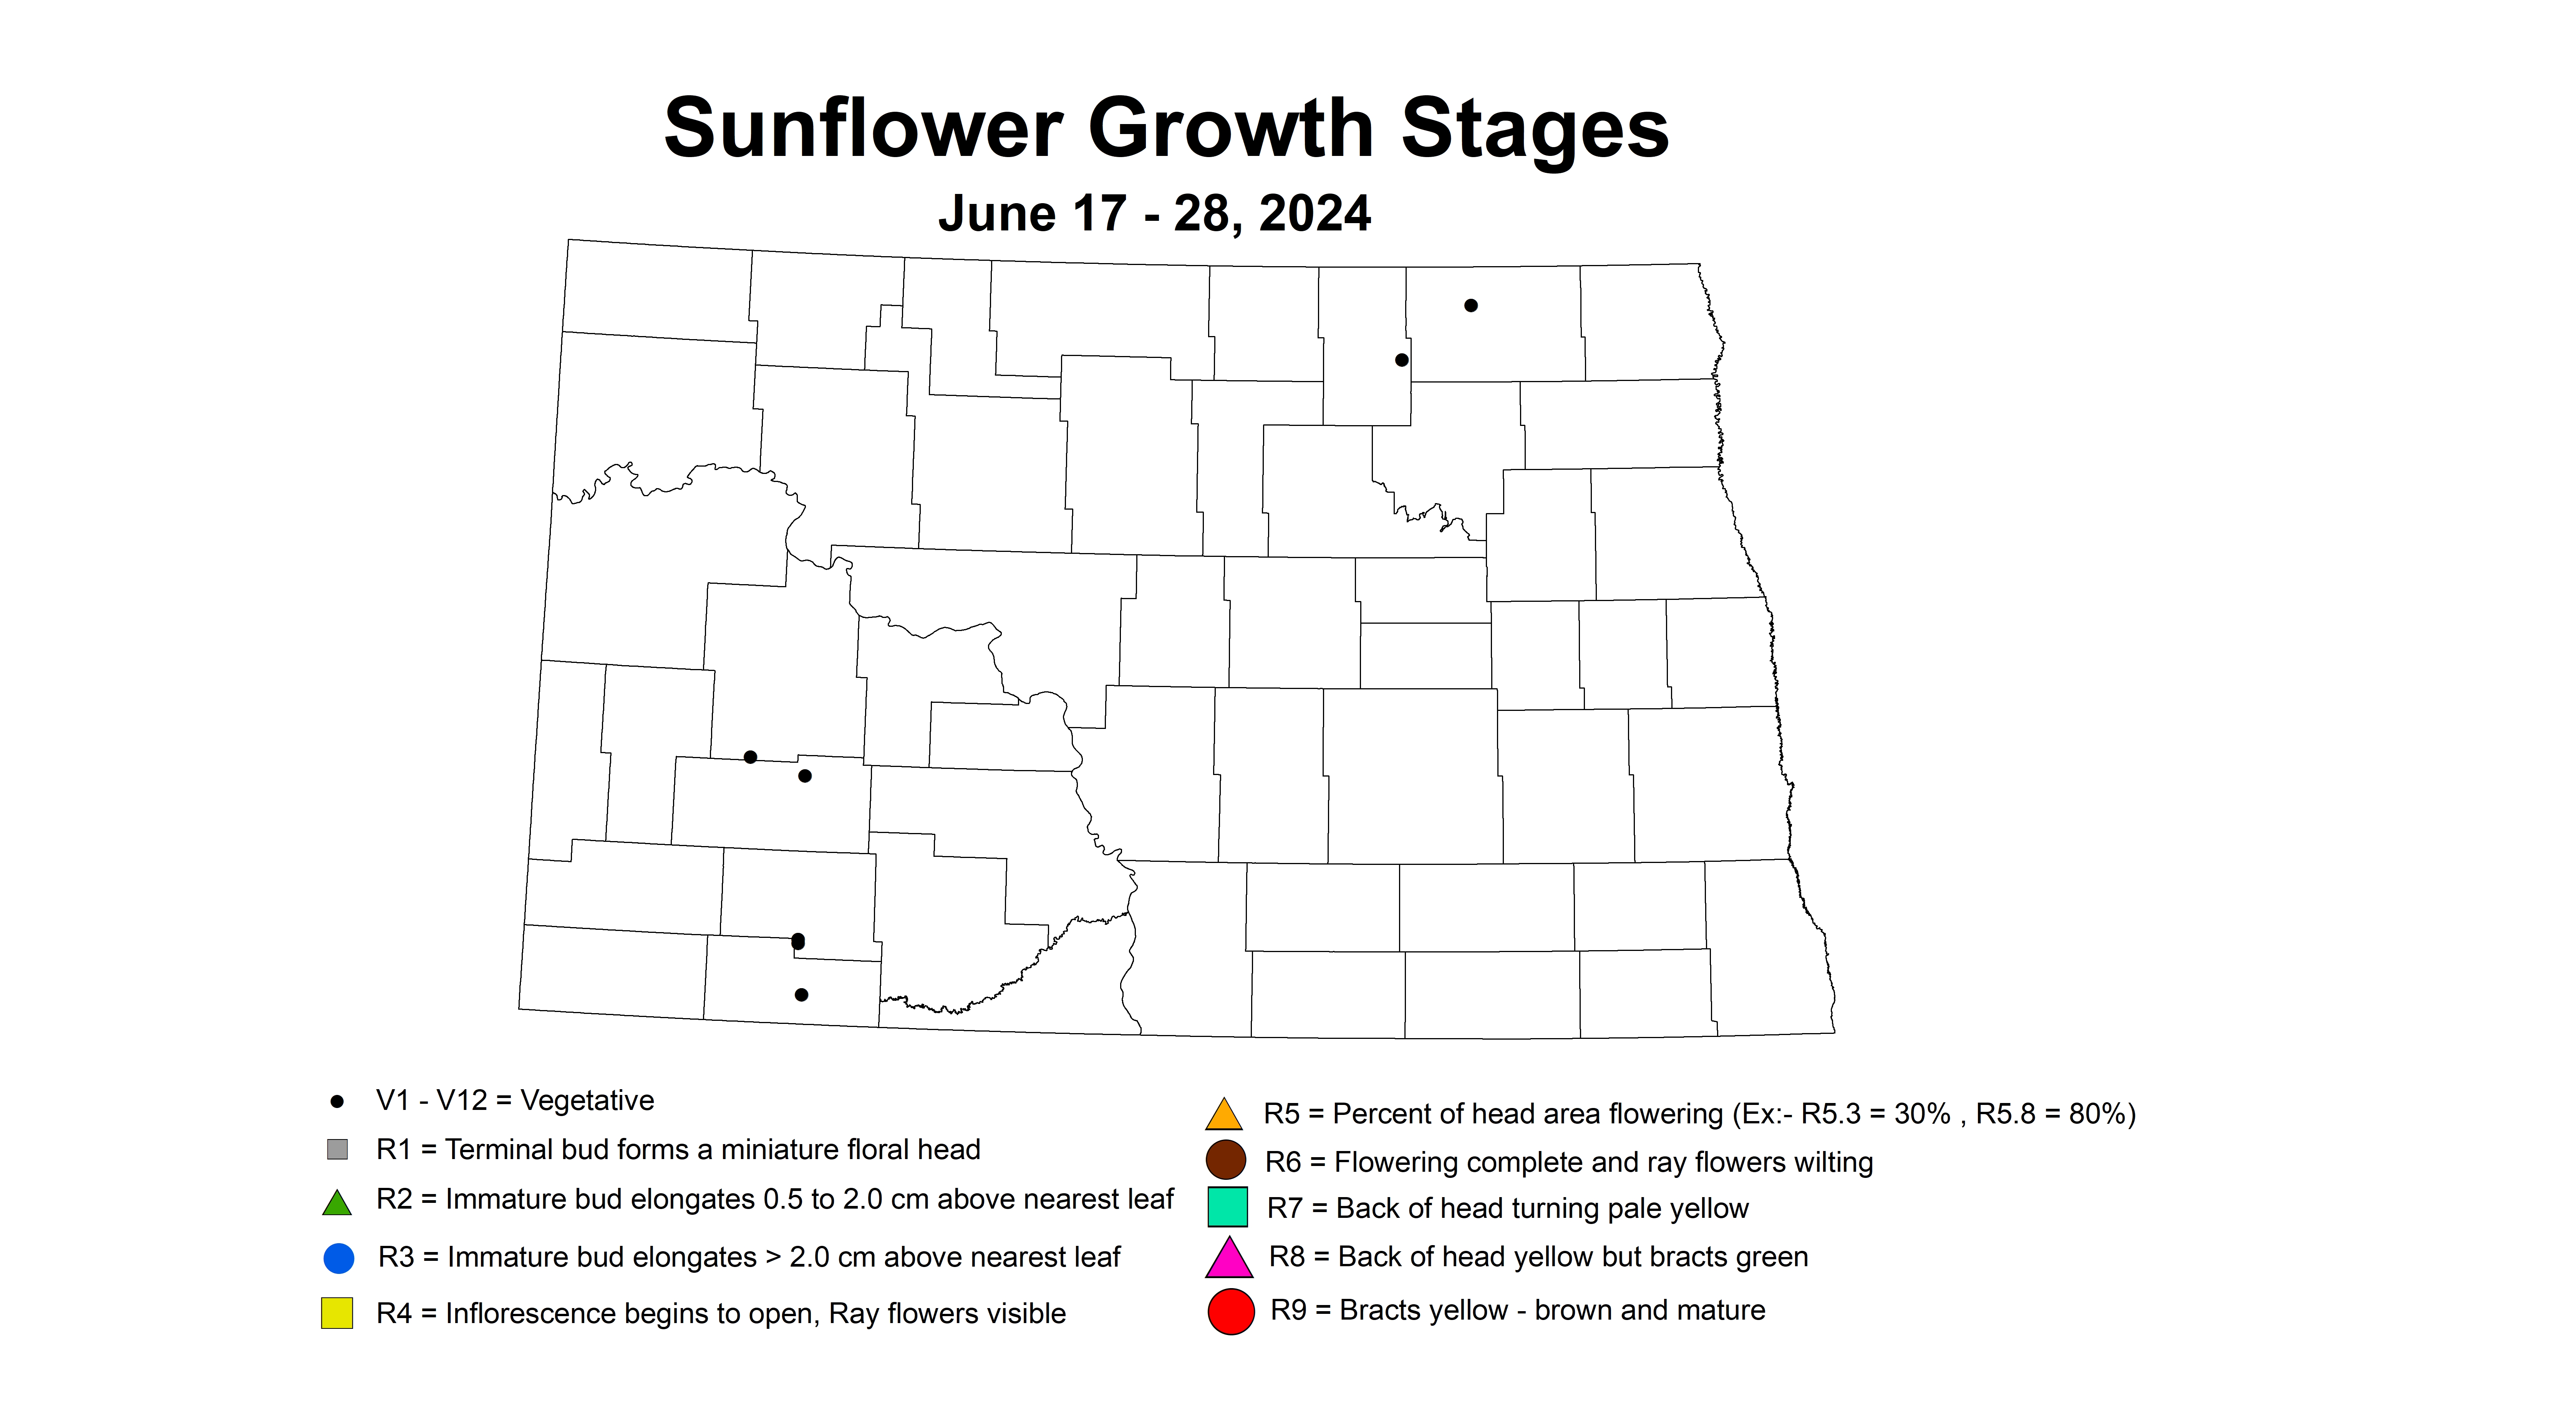 sunflower growth stages June17-28 2024